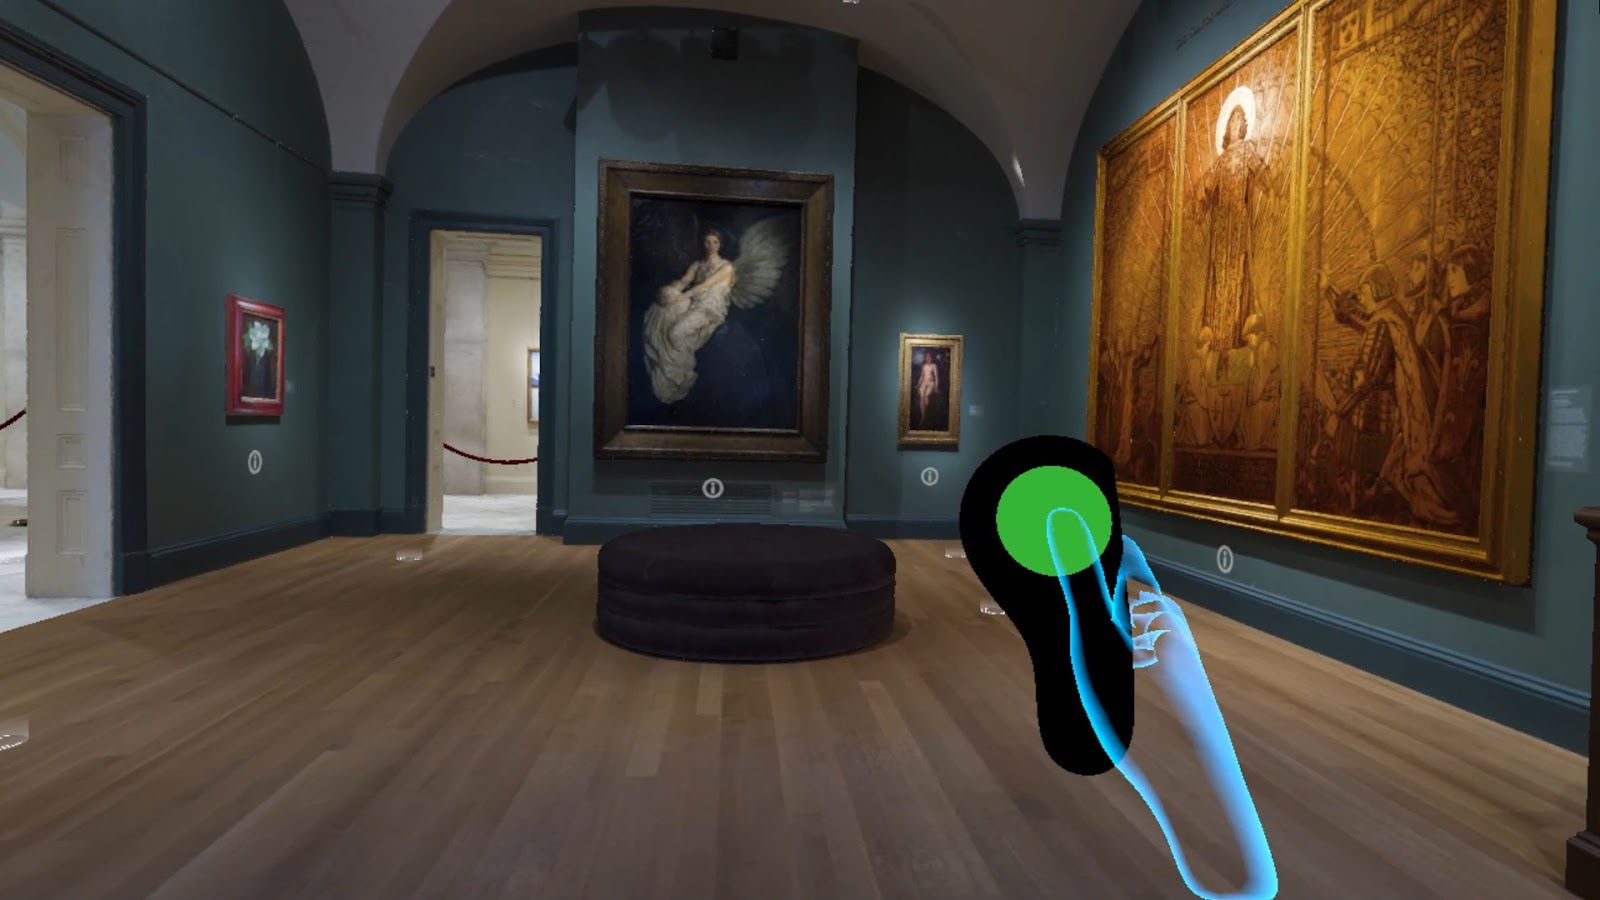 An art museum gallery with a rendering of a hand holding a remote control overlaid